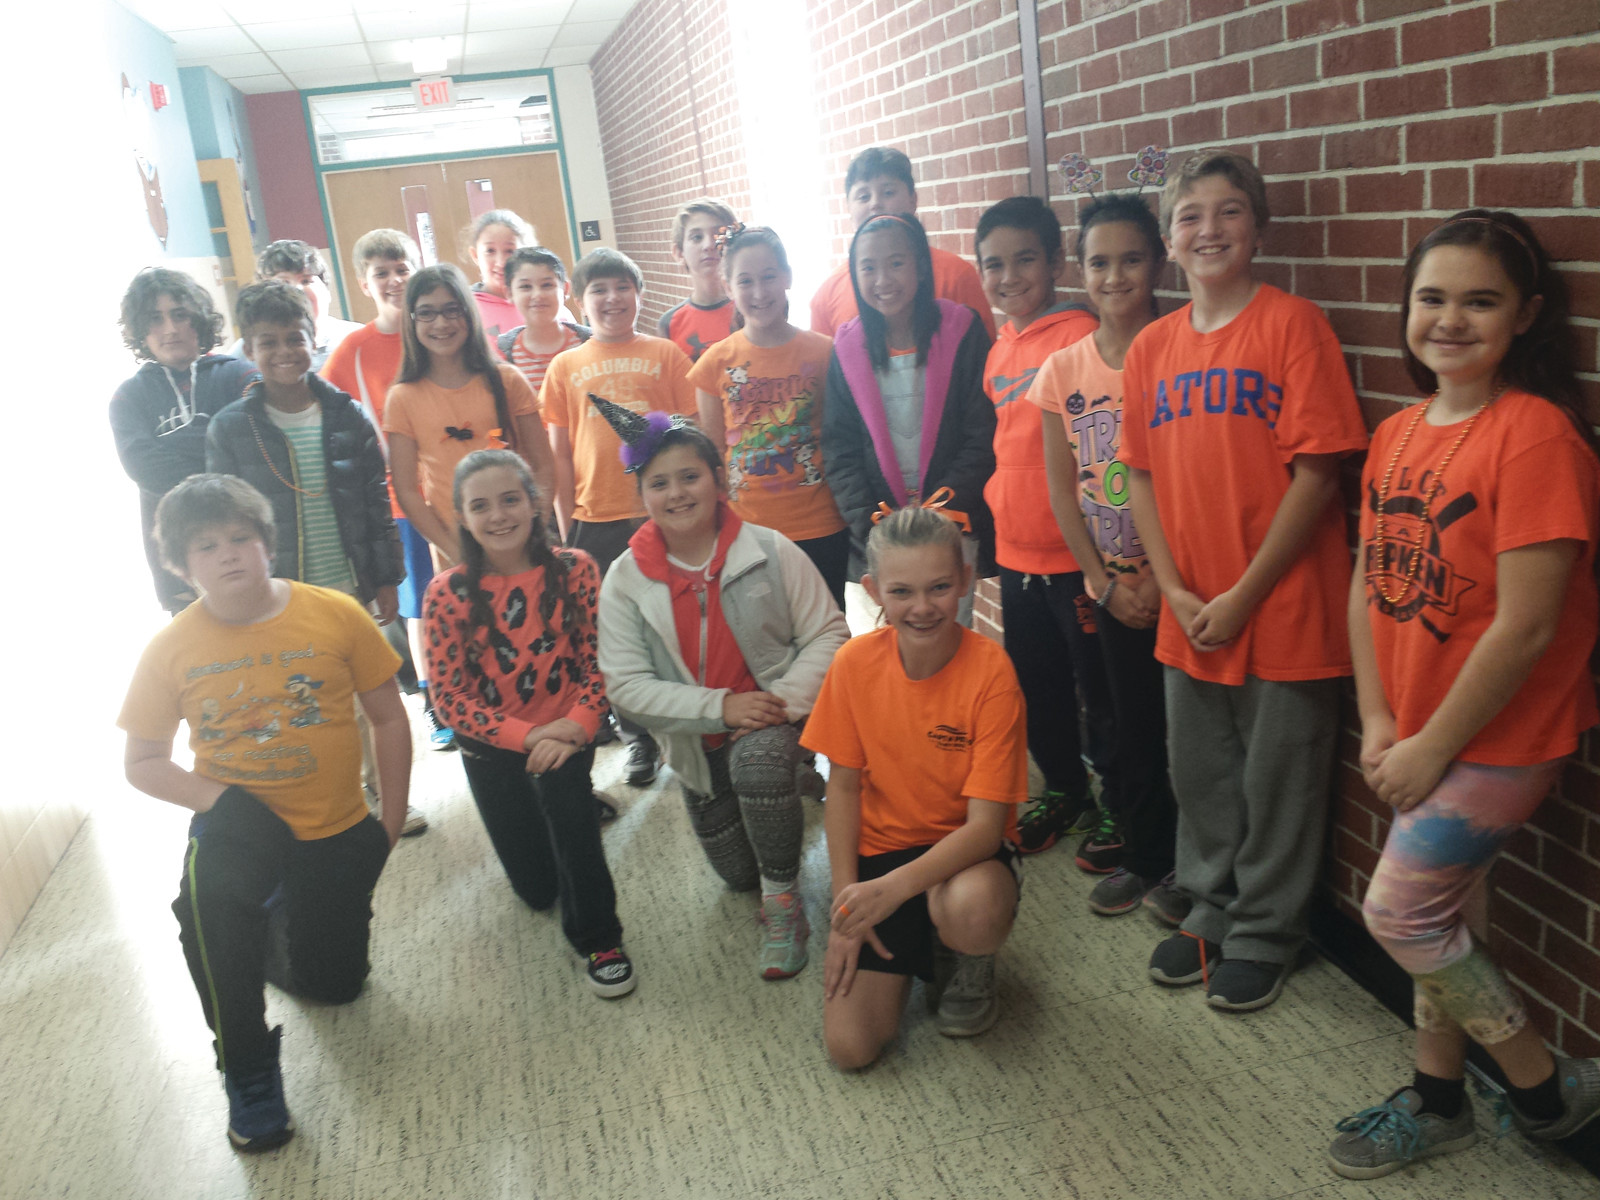 ONE OF THE FOUNDERS: Alexandra Cowart, one of the co-founders of Cranston’s annual Go Orange event, poses with her fifth-grade class on Oct. 30 as part of the Glen Hills Go Orange event.